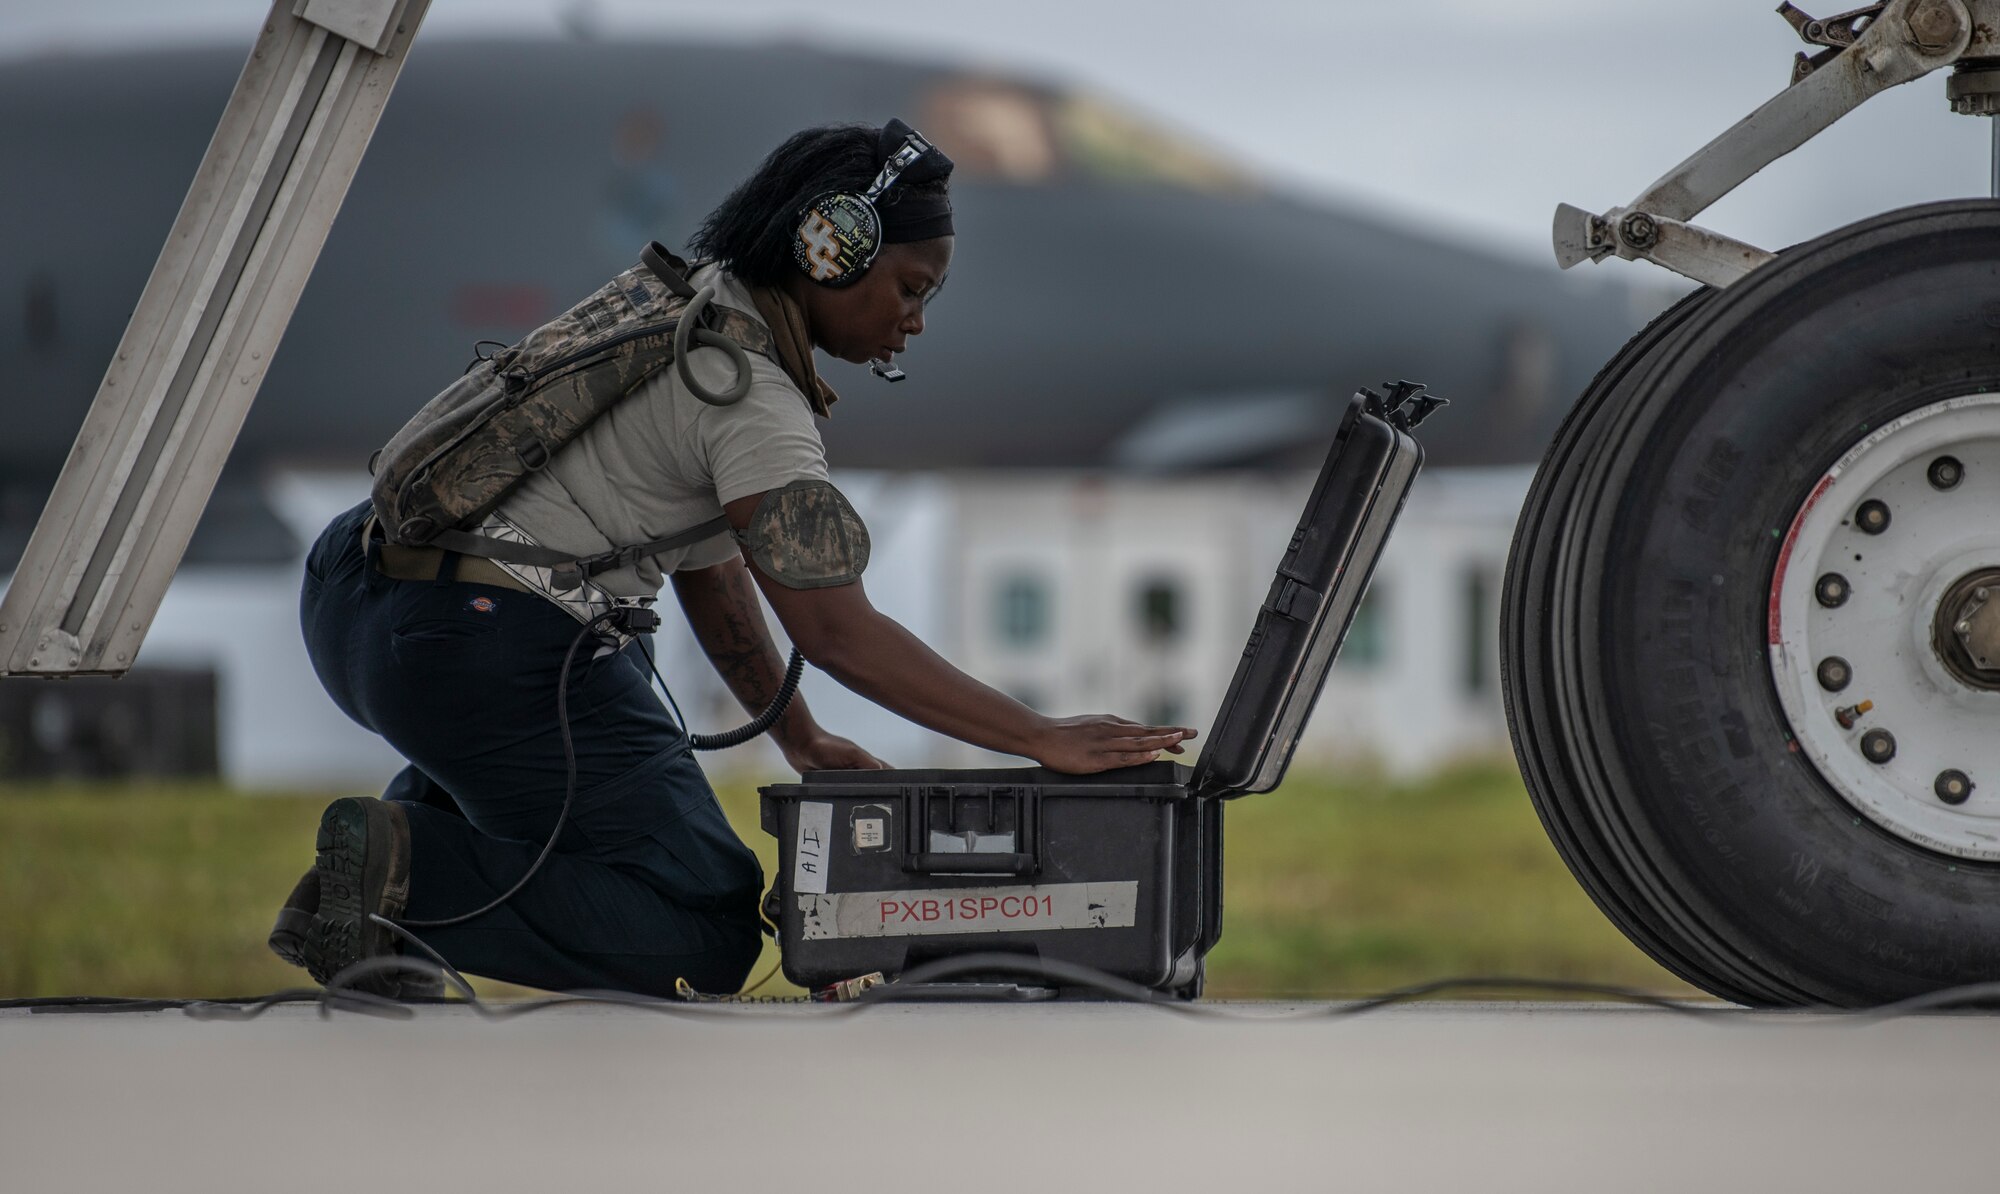 Senior Airman Raisa Ward, 9th Expeditionary Bomb Squadron Aircraft Maintenance Unit avionics technician, organizes a tool box at Andersen Air Force Base, Guam, May 5, 2020, after performing maintenance on a B-1B Lancer. The 9th EBS, and other units assigned to the 7th Bomb Wing of Dyess Air Force Base, Texas, are deployed to Guam as part of a Bomber Task Force to support Pacific Air Forces’ training efforts with allies, partners and joint forces; and strategic deterrence missions to reinforce the rules-based order in the Indo-Pacific Region. (U.S. Air Force photo by Senior Airman River Bruce)